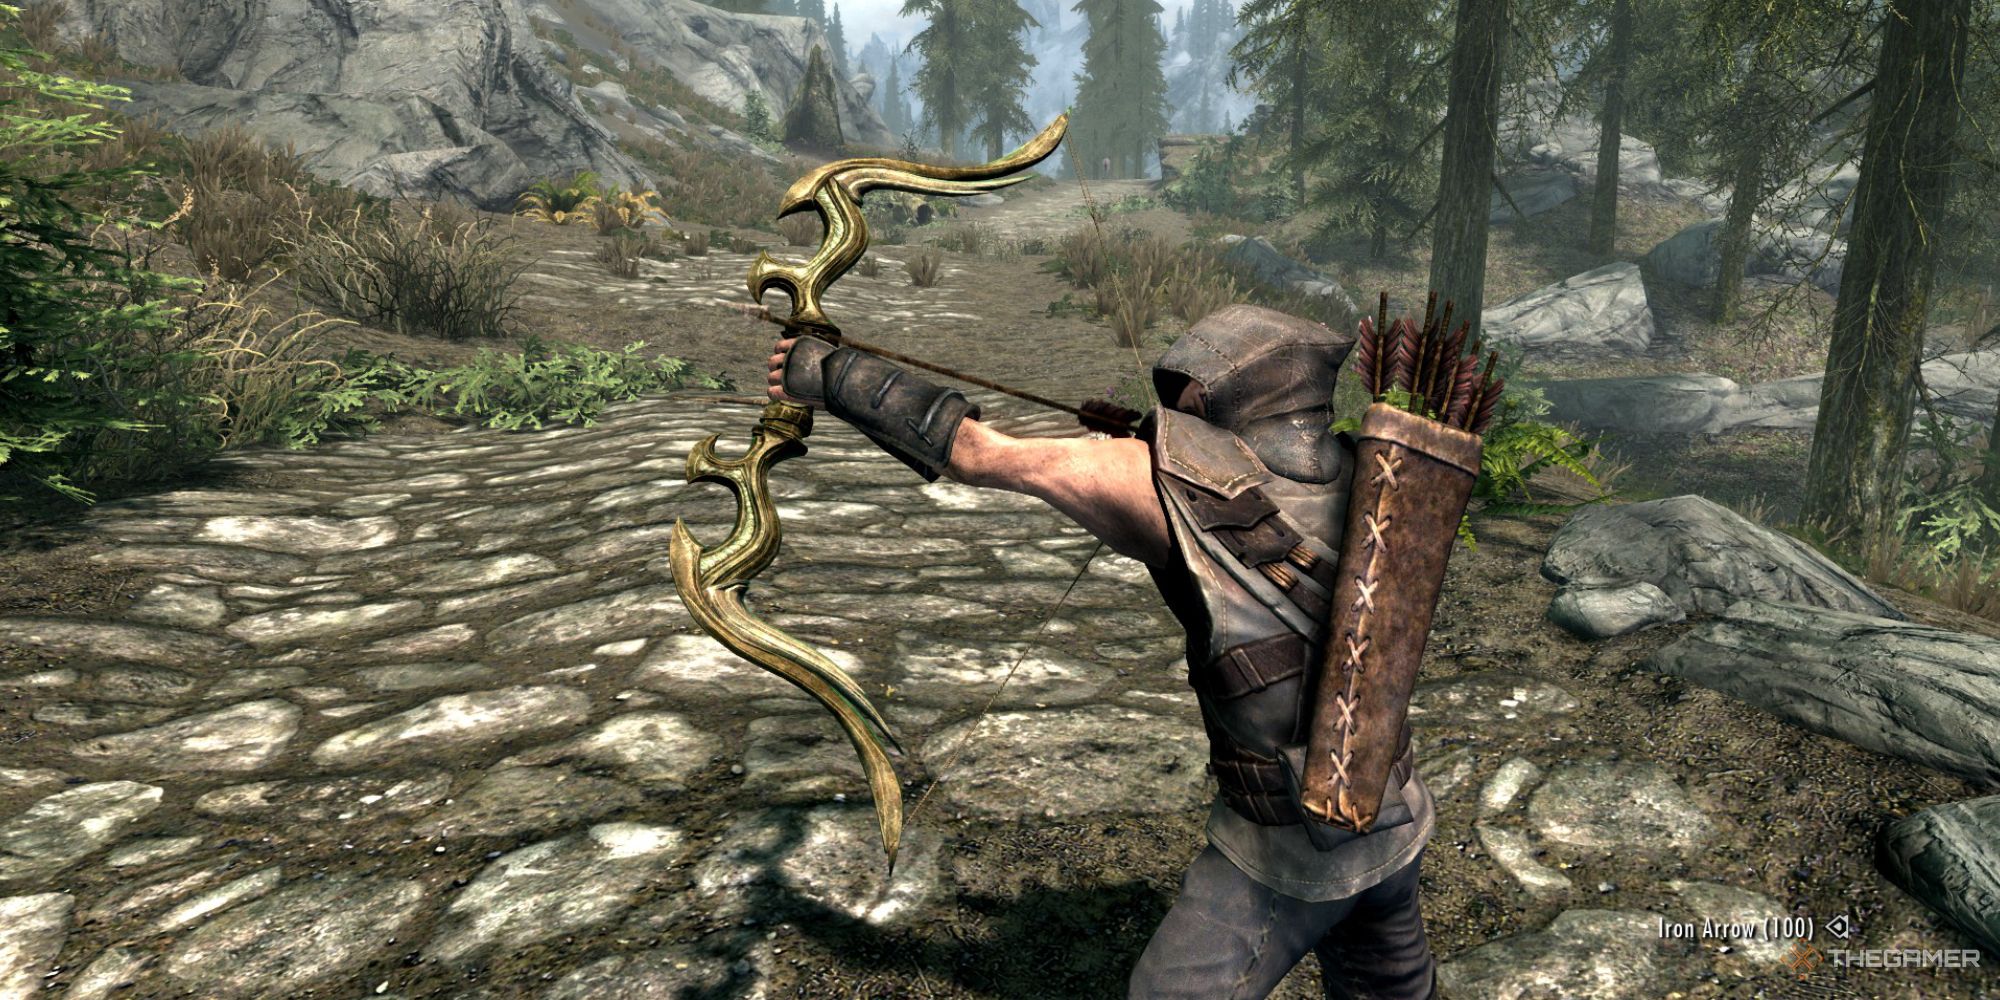 The Player Holding a Glass Bow in Skyrim